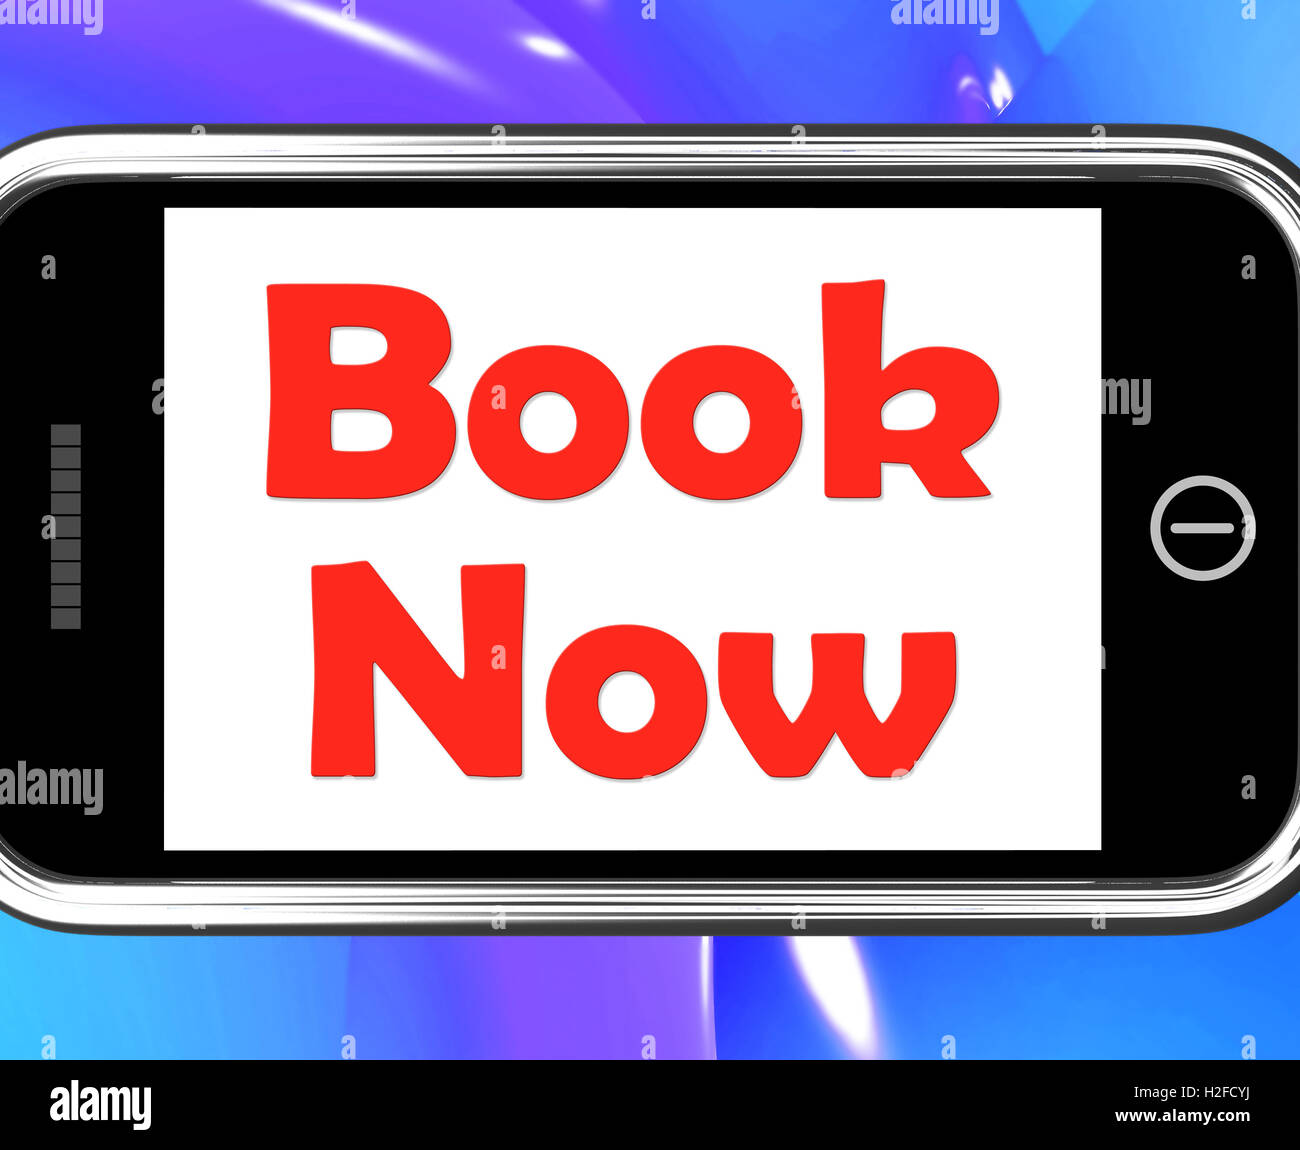 Book Now On Phone Shows For Hotel Or Flight Reservation Stock Photo